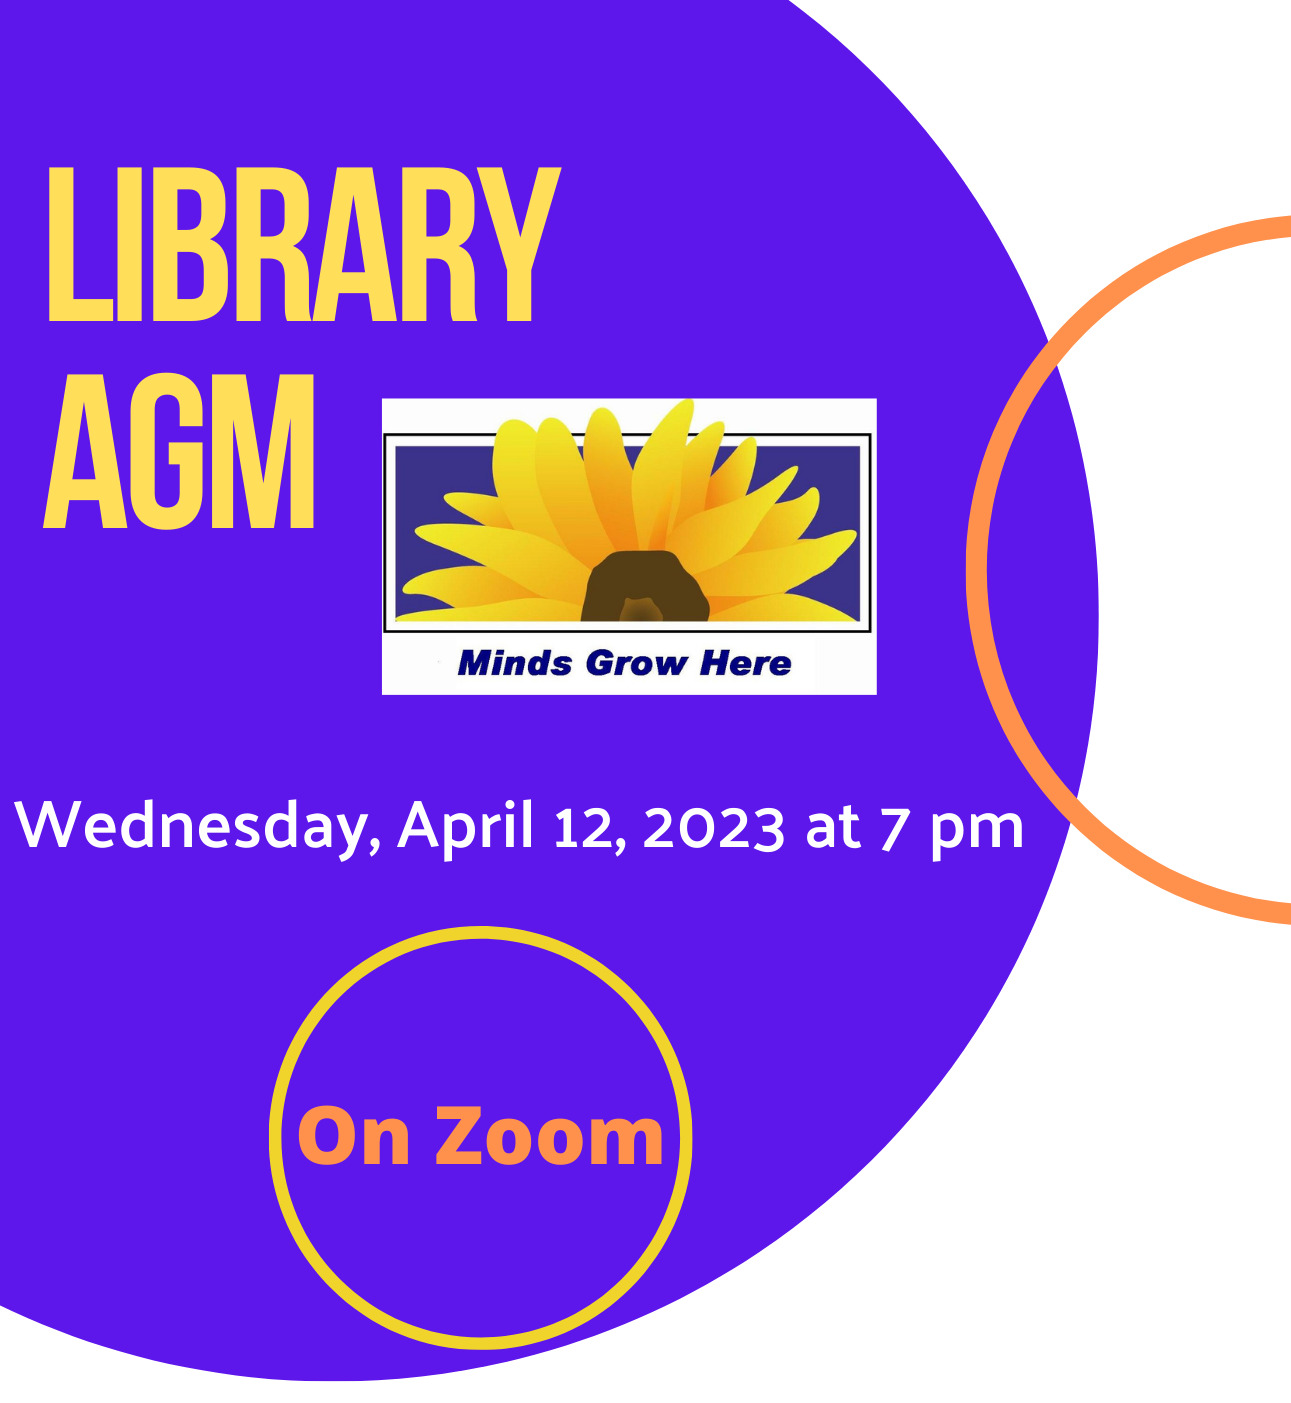 Library AGM Wednesday April 12 at 7pm on Zoom.